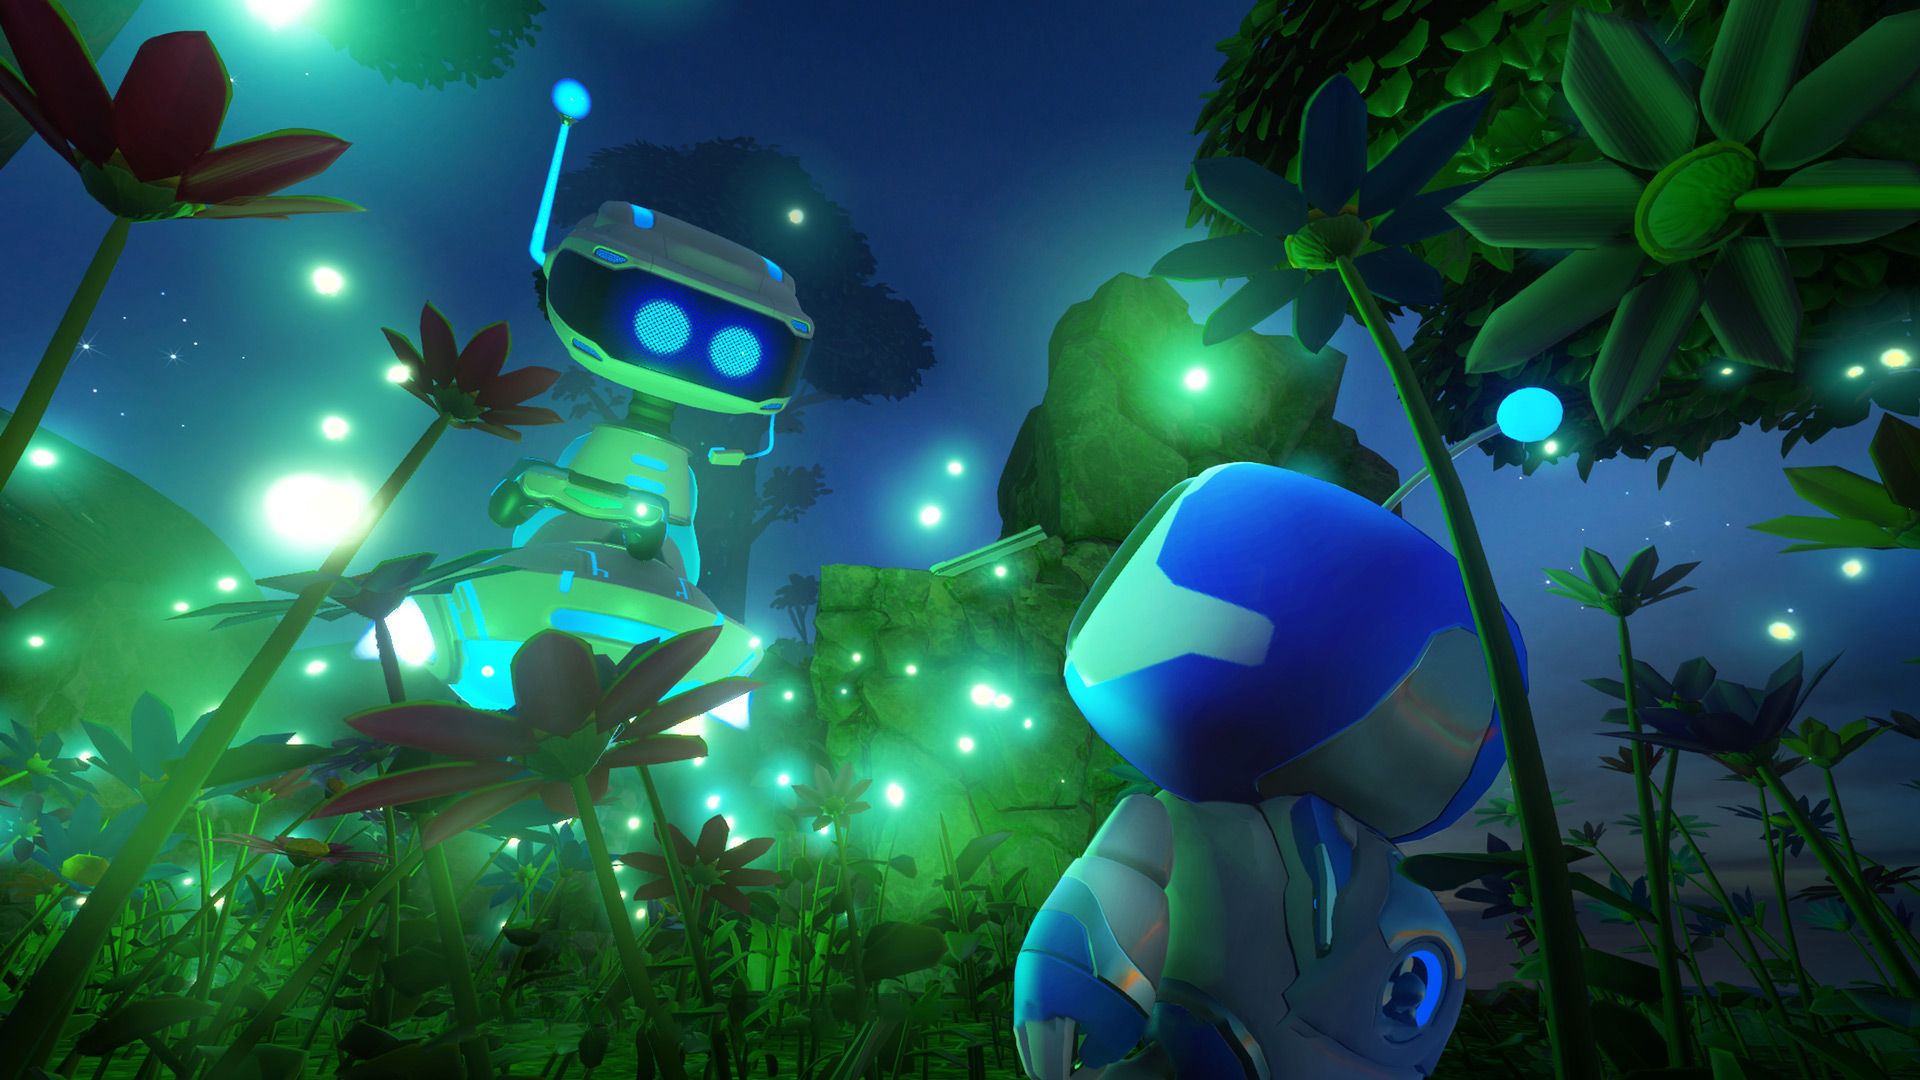 Astro Bot Rescue Mission VR Game Wallpaper 67749 1920x1080px